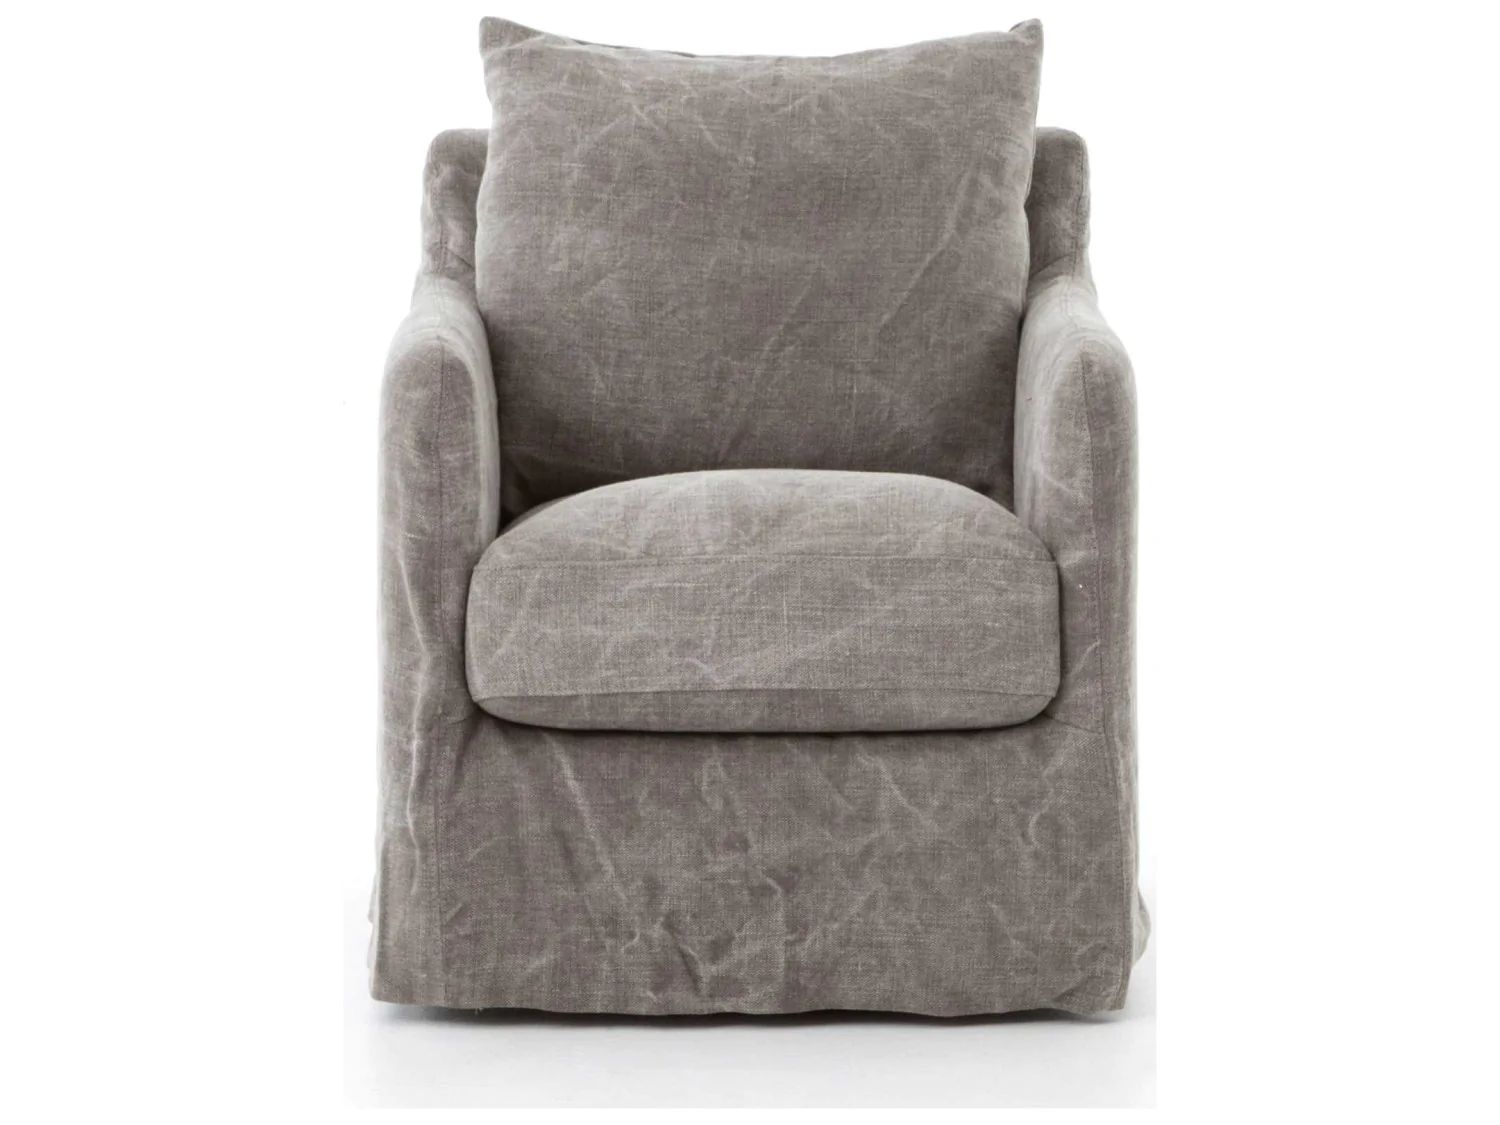 Marshall Swivel Chair- Stonewashed Gray | Eclectic Goods